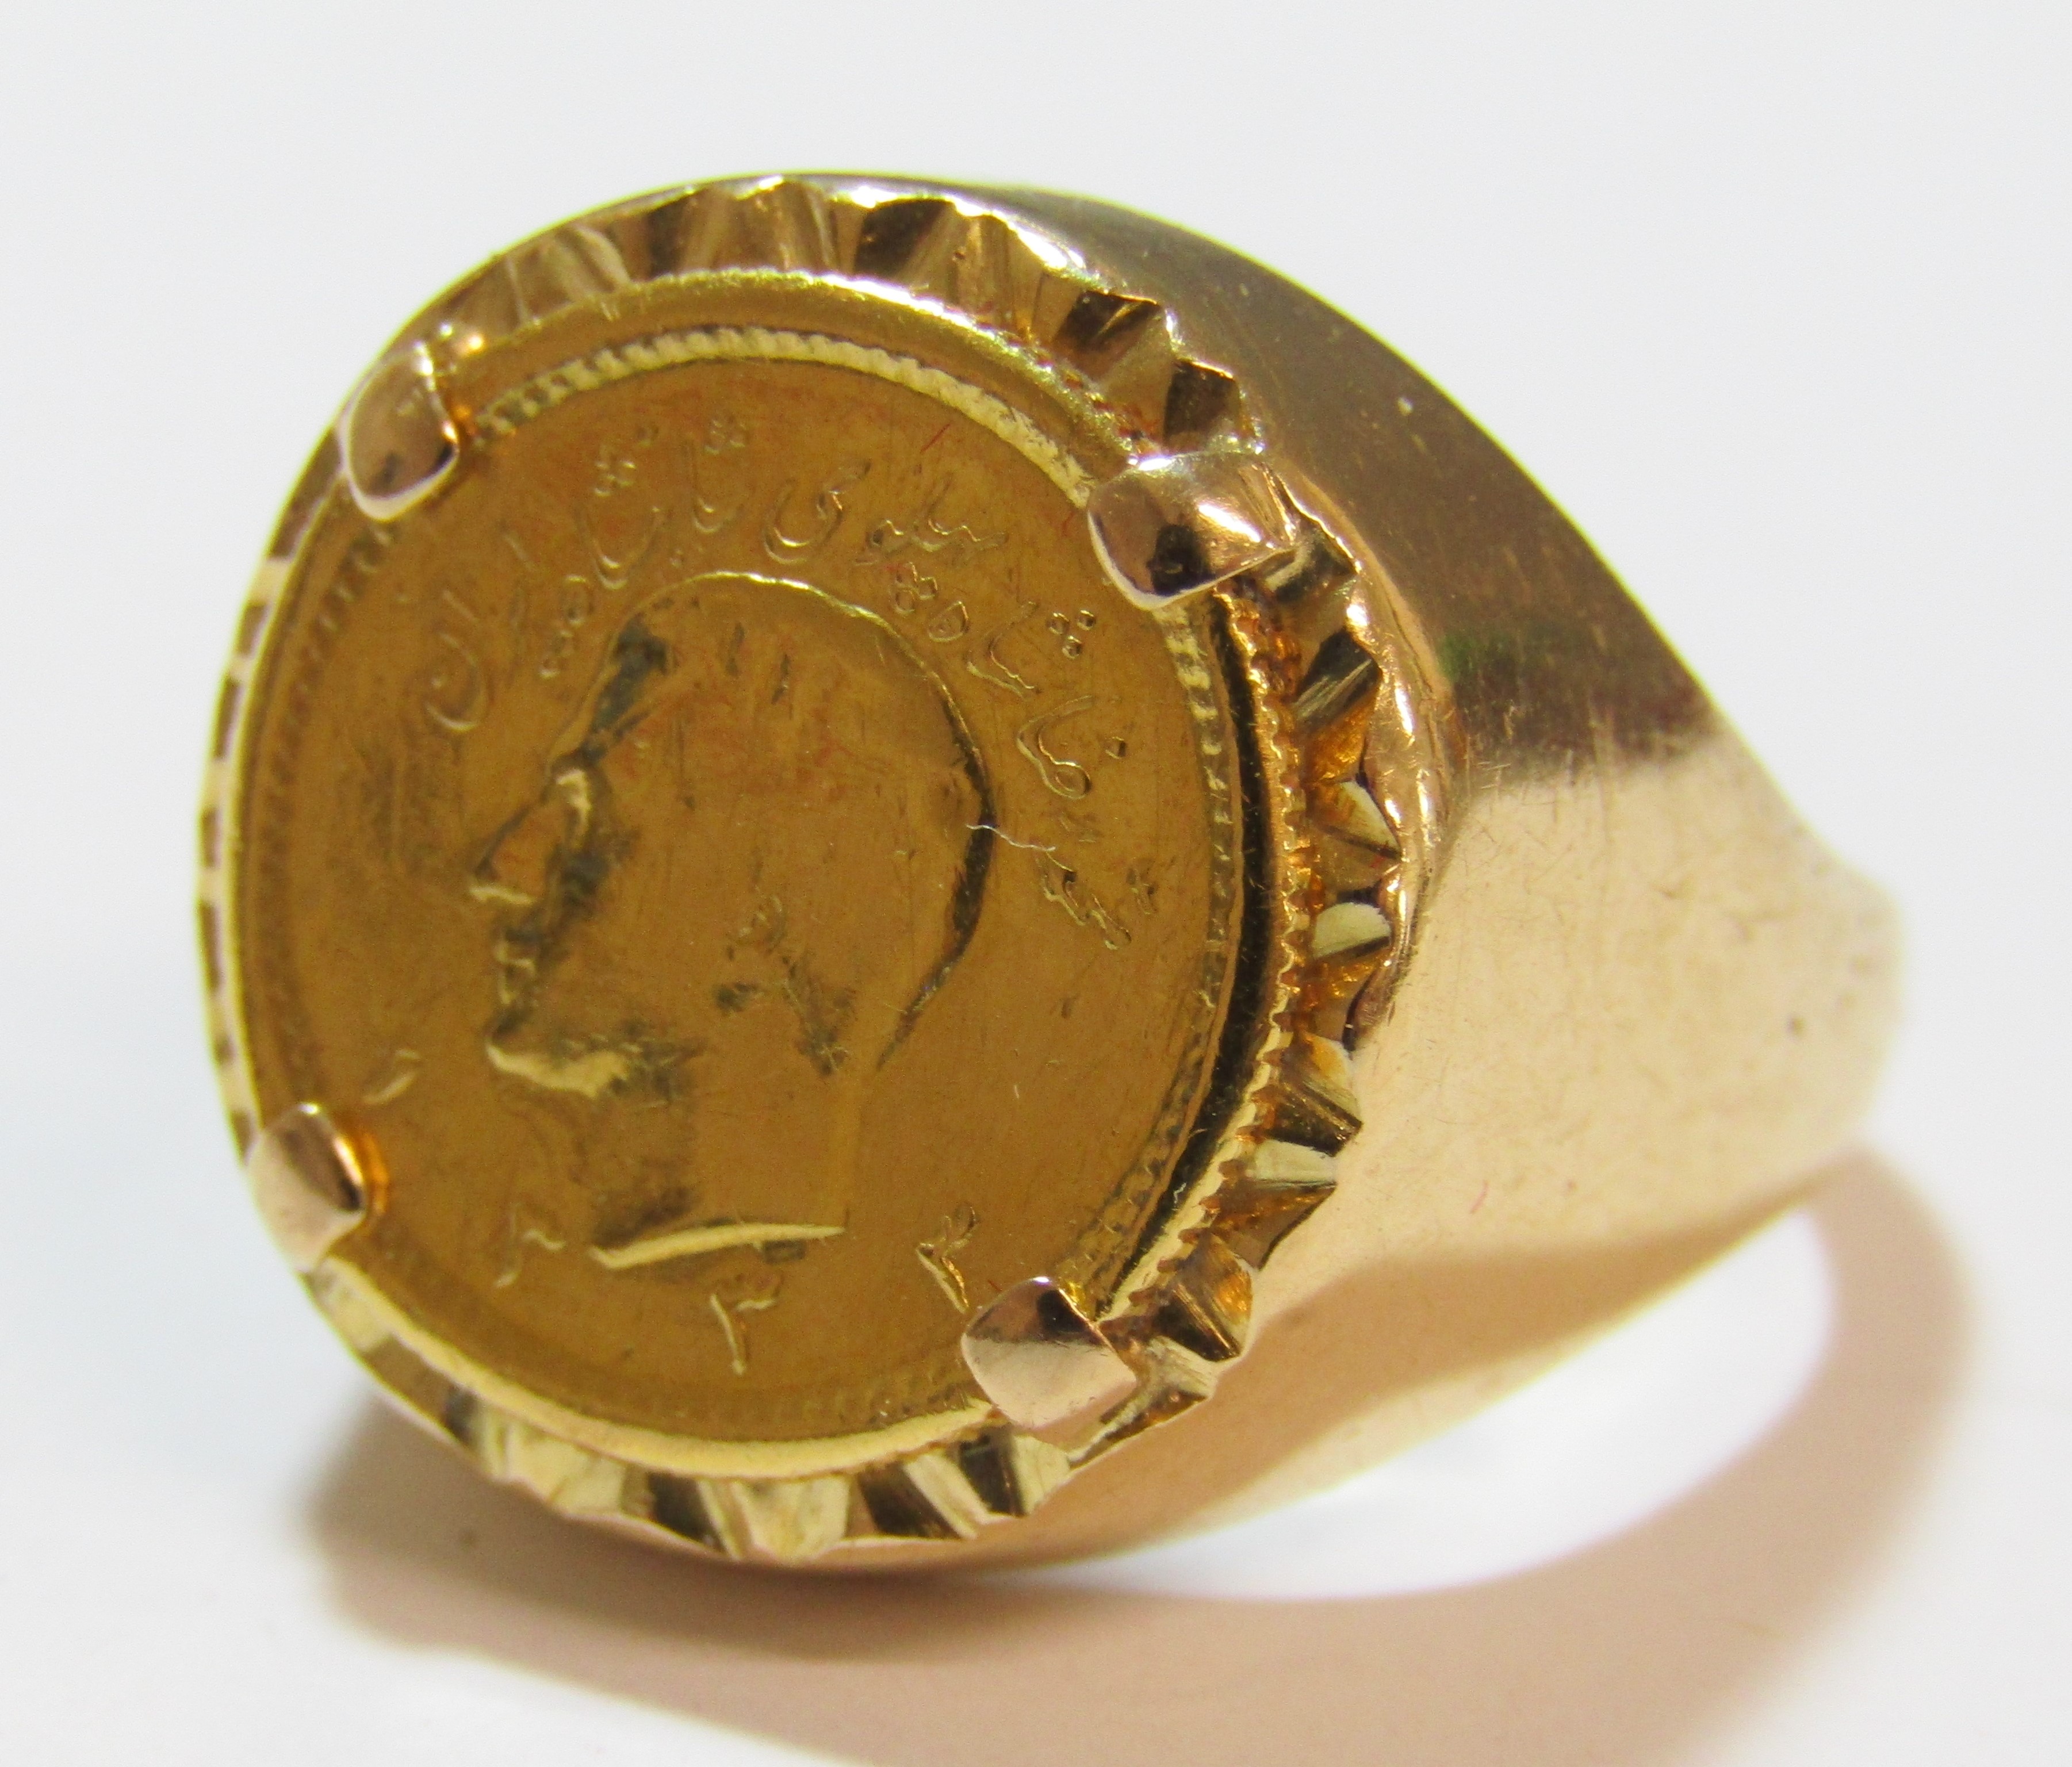 Tested as 9ct gold ring mounted with 22ct Phalavi Mohammad Reza Shah Iran gold quarter - ring size N